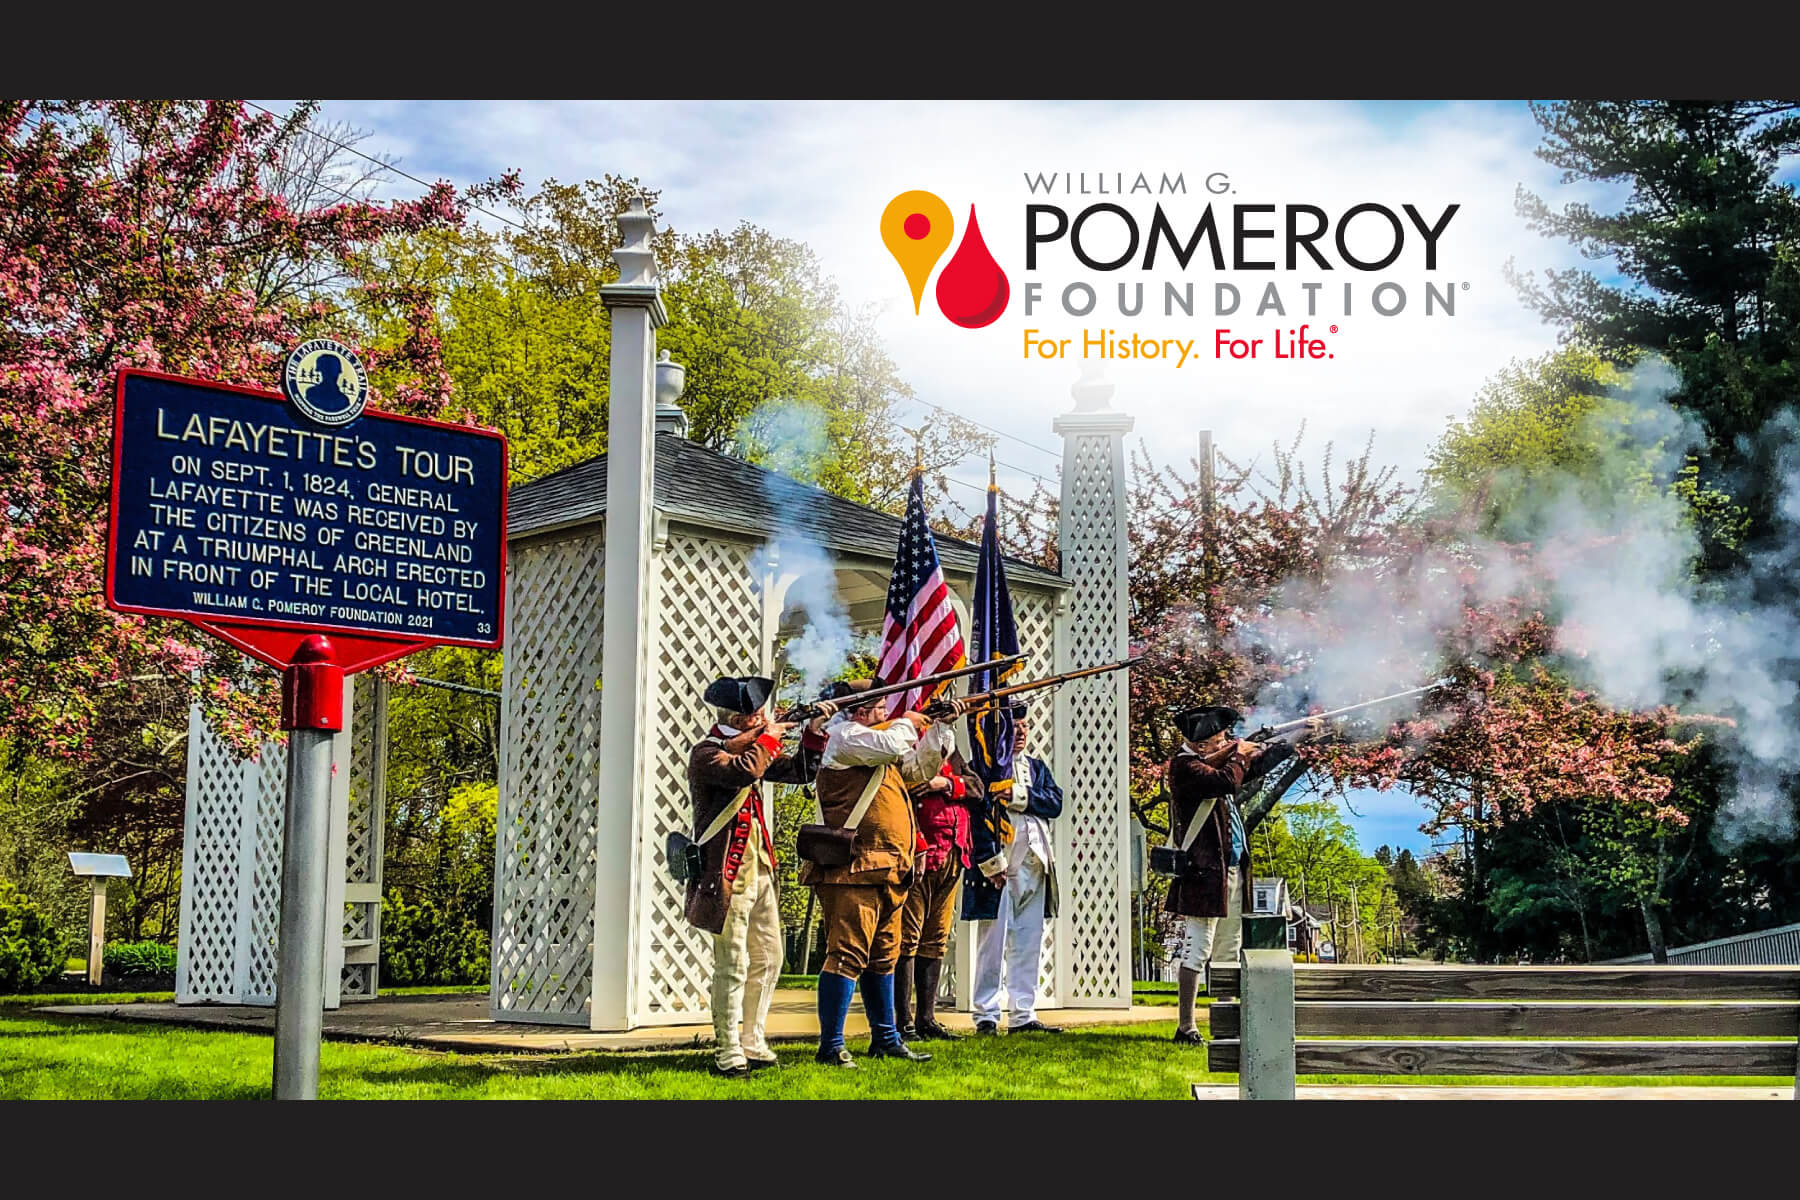 The cover of the William G. Pomeroy Foundation Booklet with men dressed as colonial soldiers aim their rifles towards the sky while standing next to a Historic marker